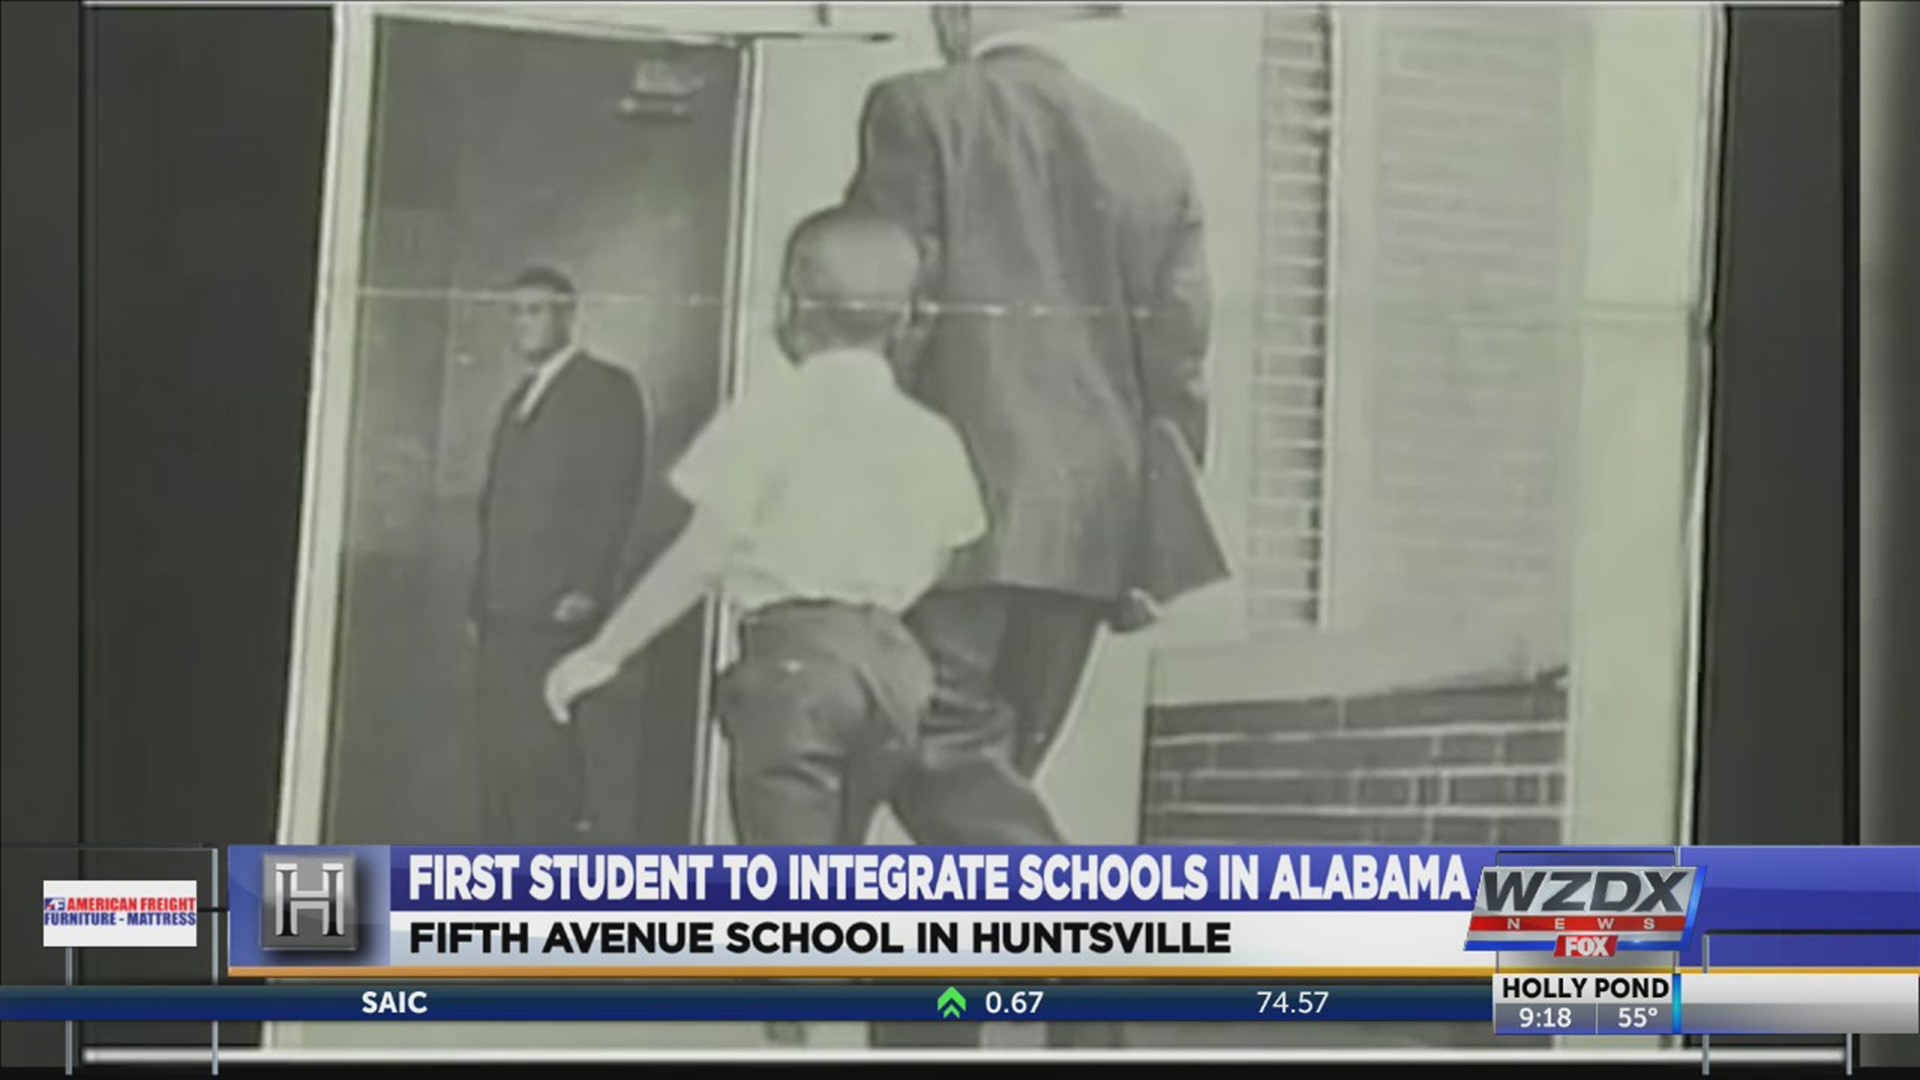 Sept. 9, 1963 is a day that changed Alabama Public Schools forever - Sonnie Hereford IV became the first African-American student to integrate public schools in the state.